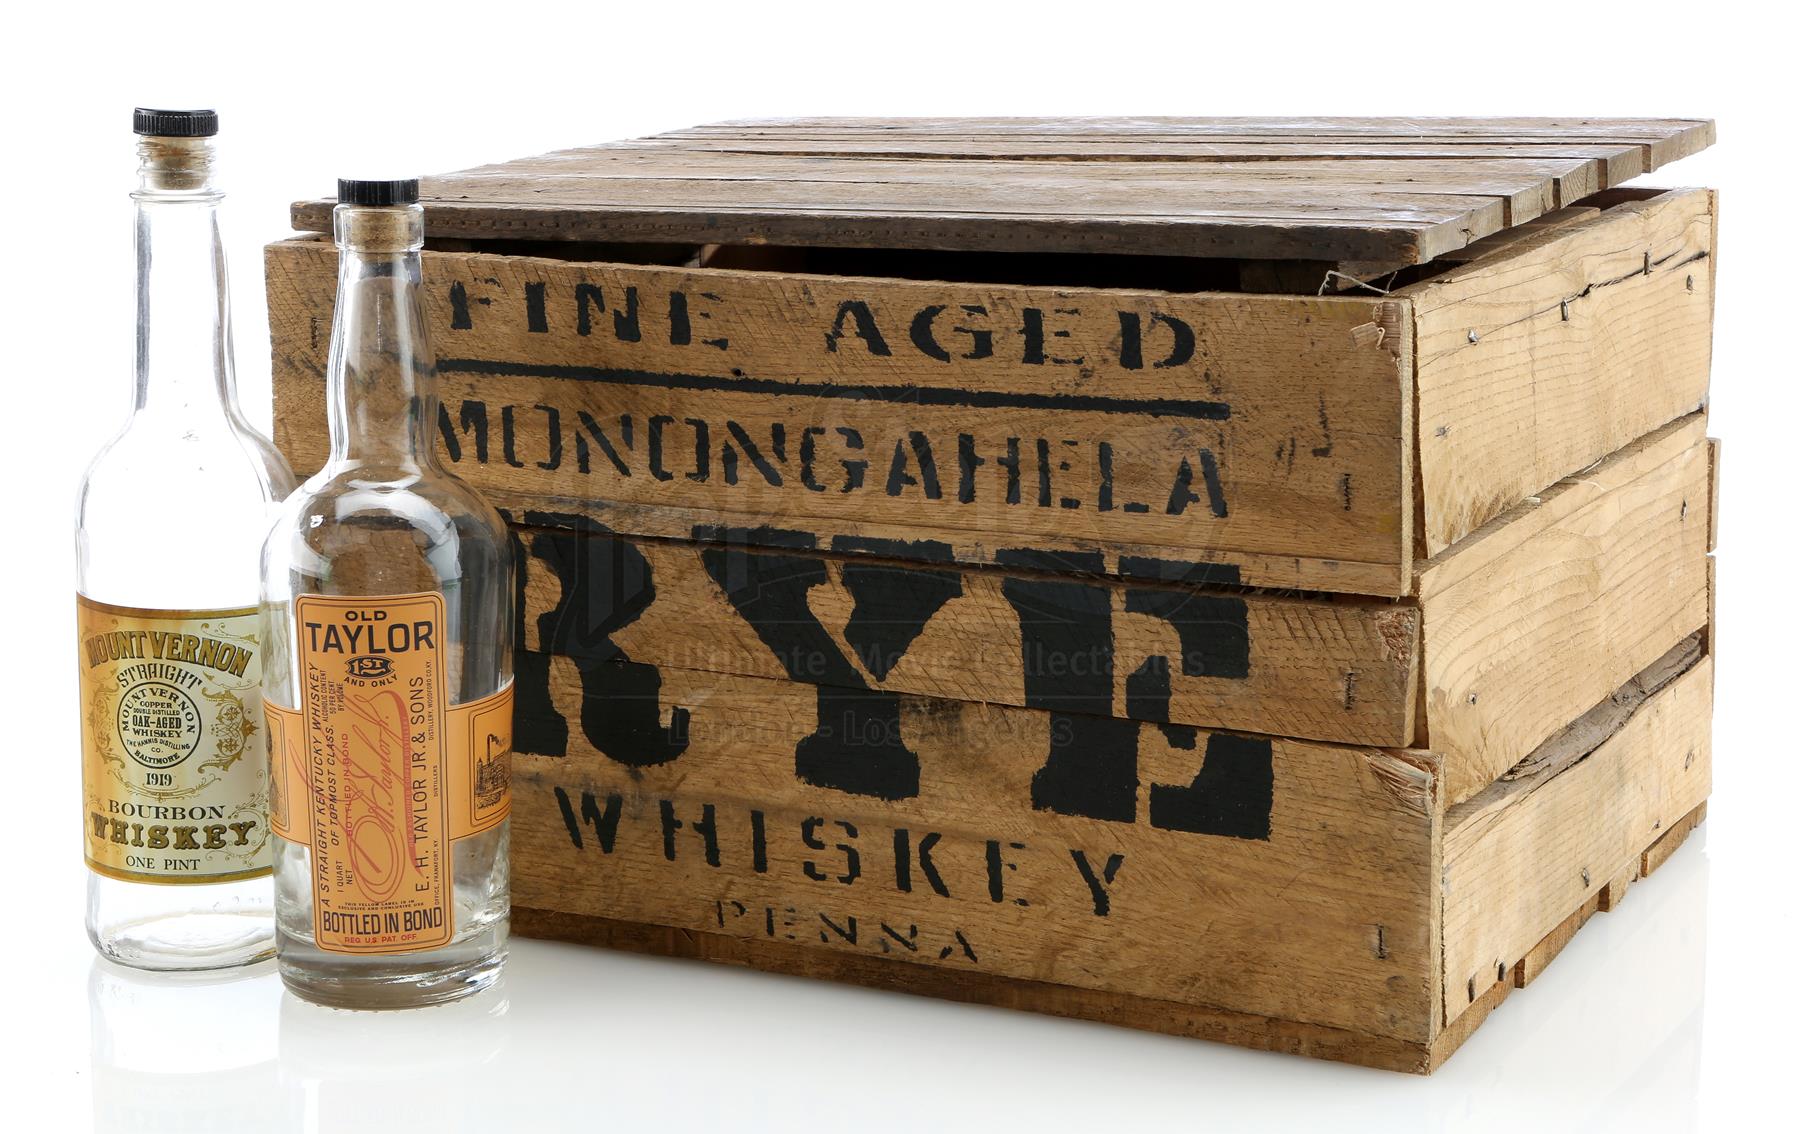 BOARDWALK EMPIRE (2010 - 2014) - Prohibition-Era Light Wood Whiskey Crate  and Whiskey Bottles - Current price: $300